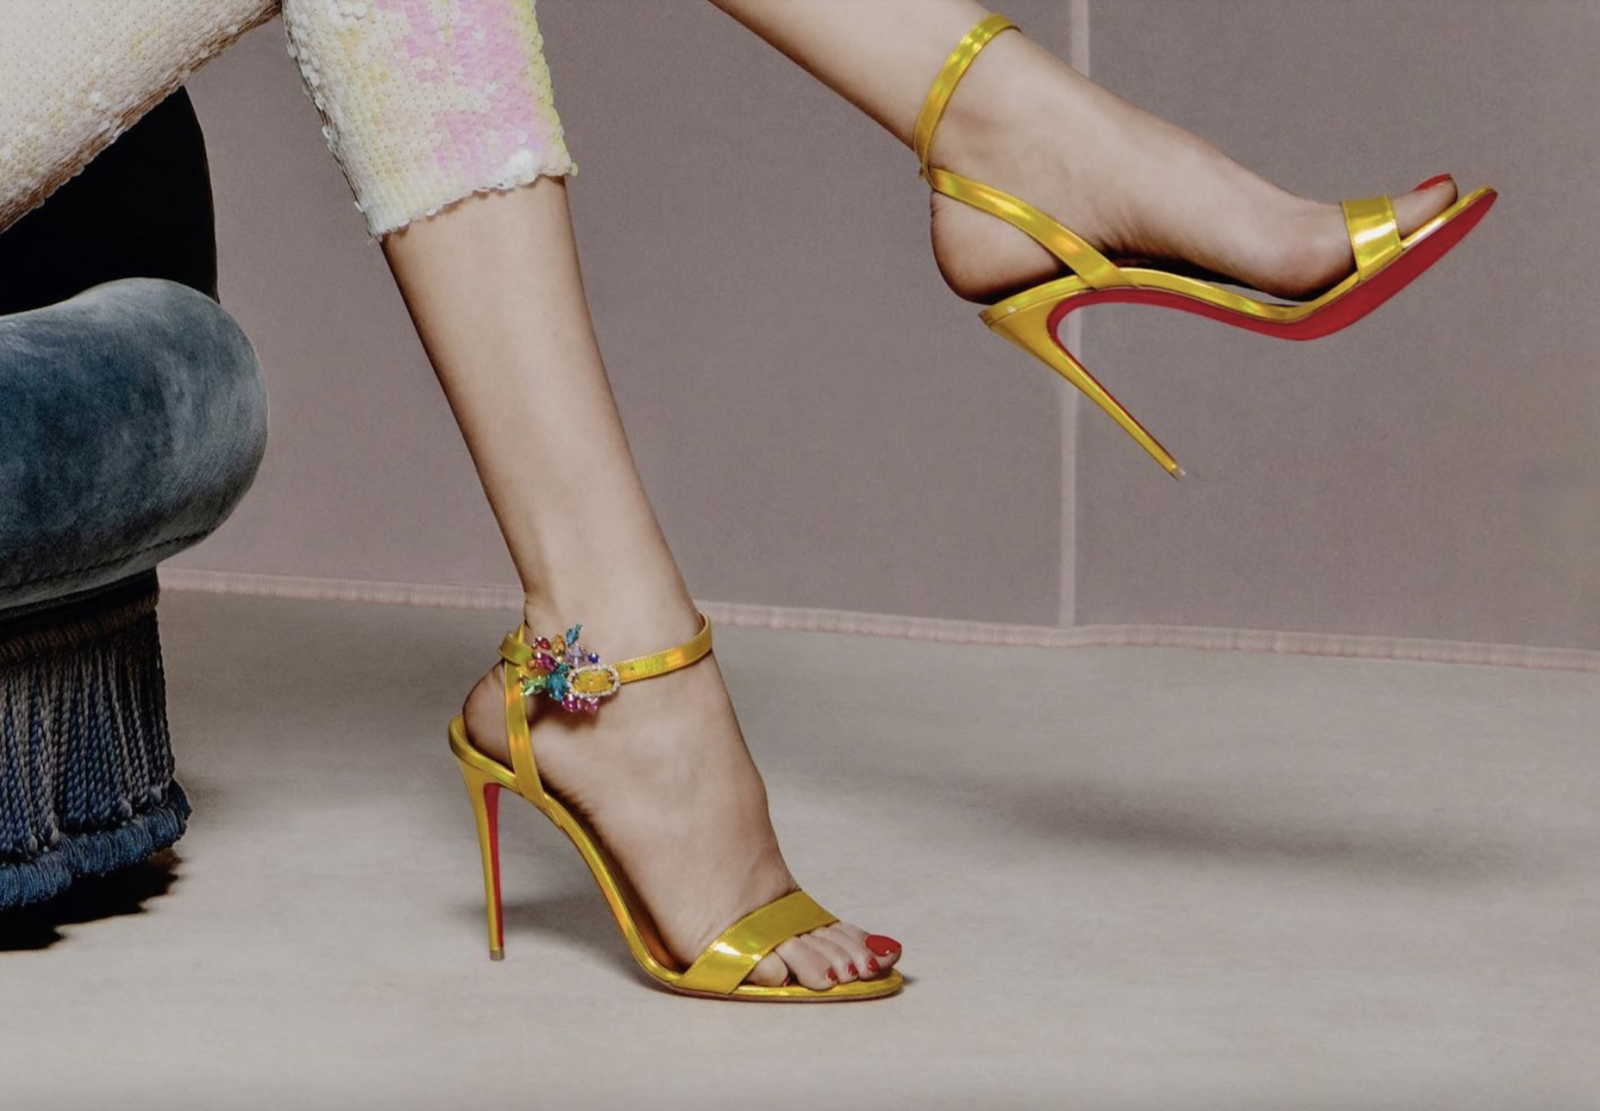 How do you trademark a colour? Christian Louboutin is trying its best